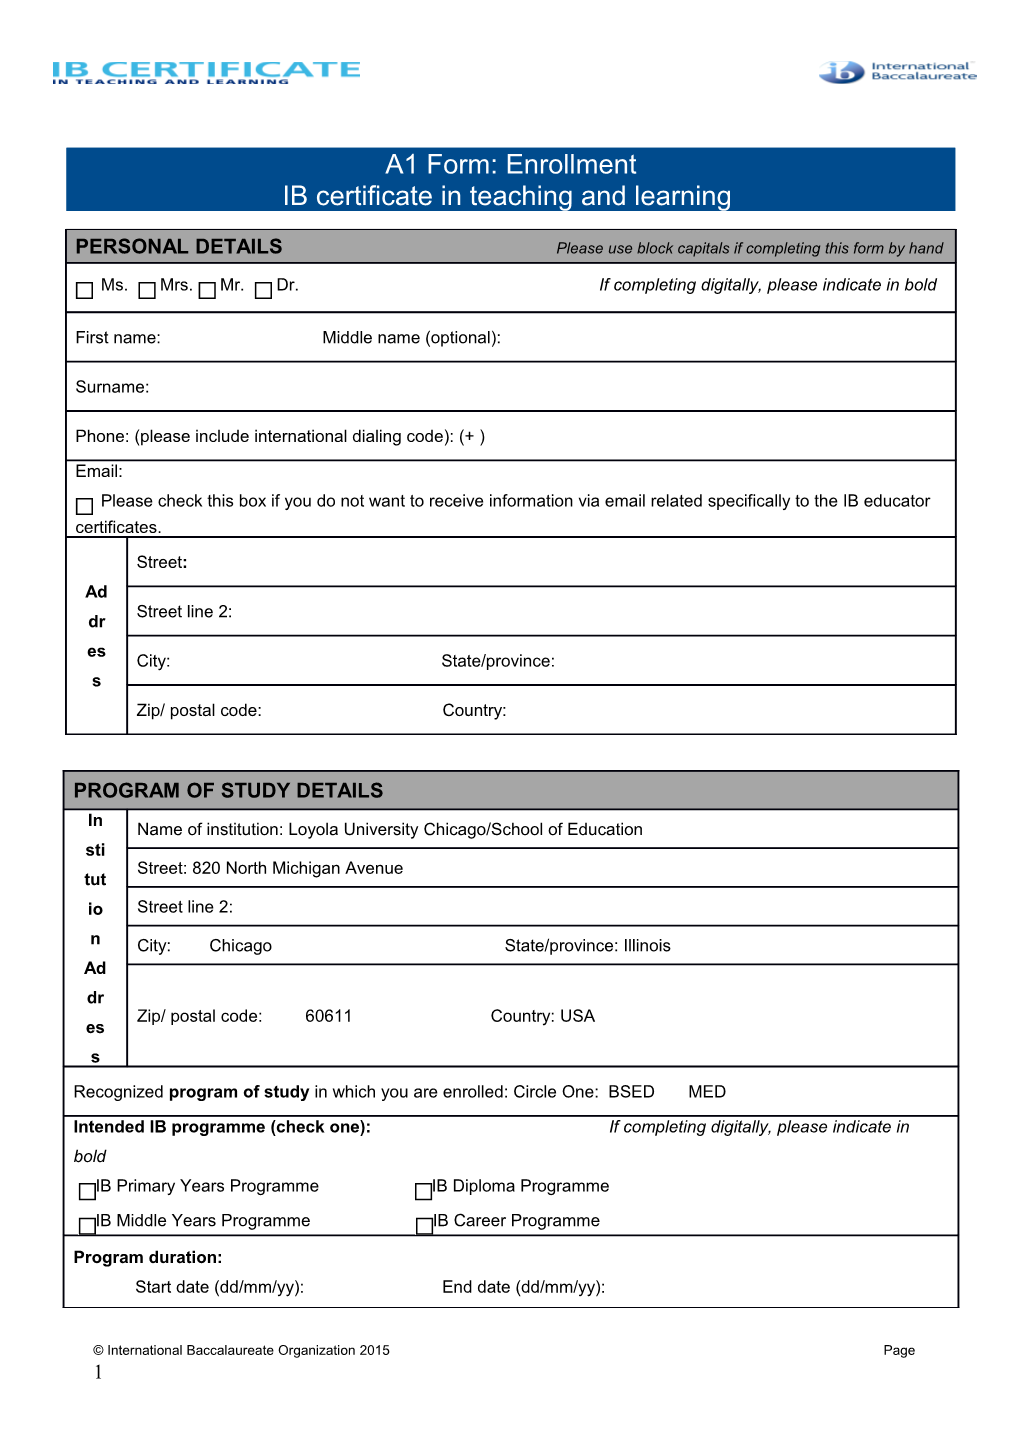 Please Return This Form by E-Mail Toyour Program Point of Contact